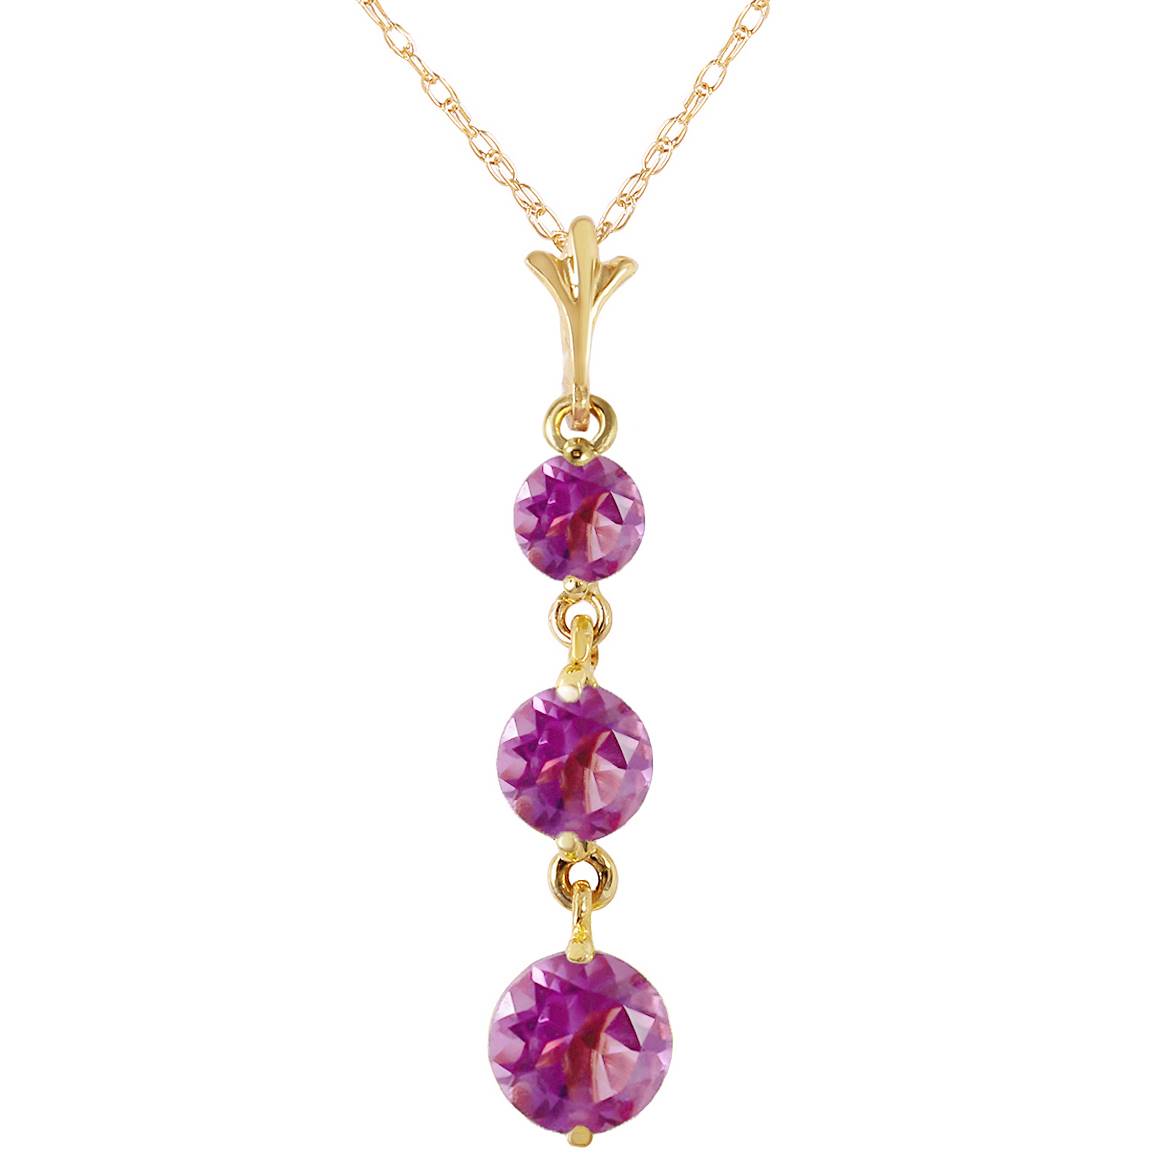 3.6 Carat 14K Solid Yellow Gold Counting Kisses Amethyst Necklace